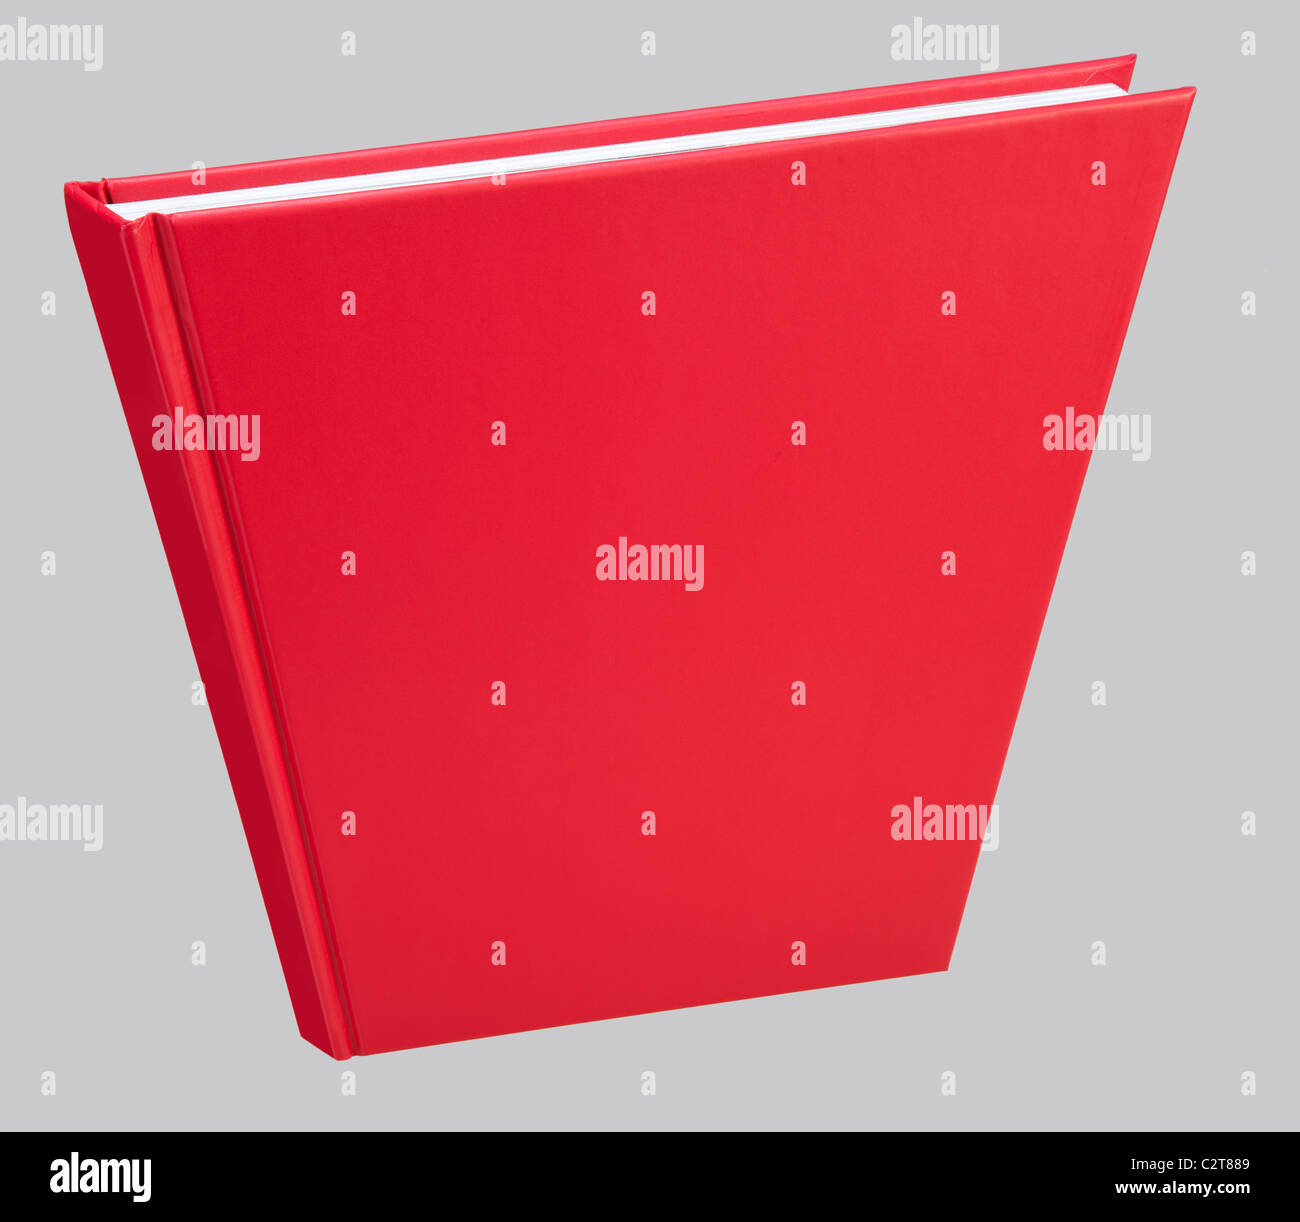 Red book in perspective, for design layout Stock Photo